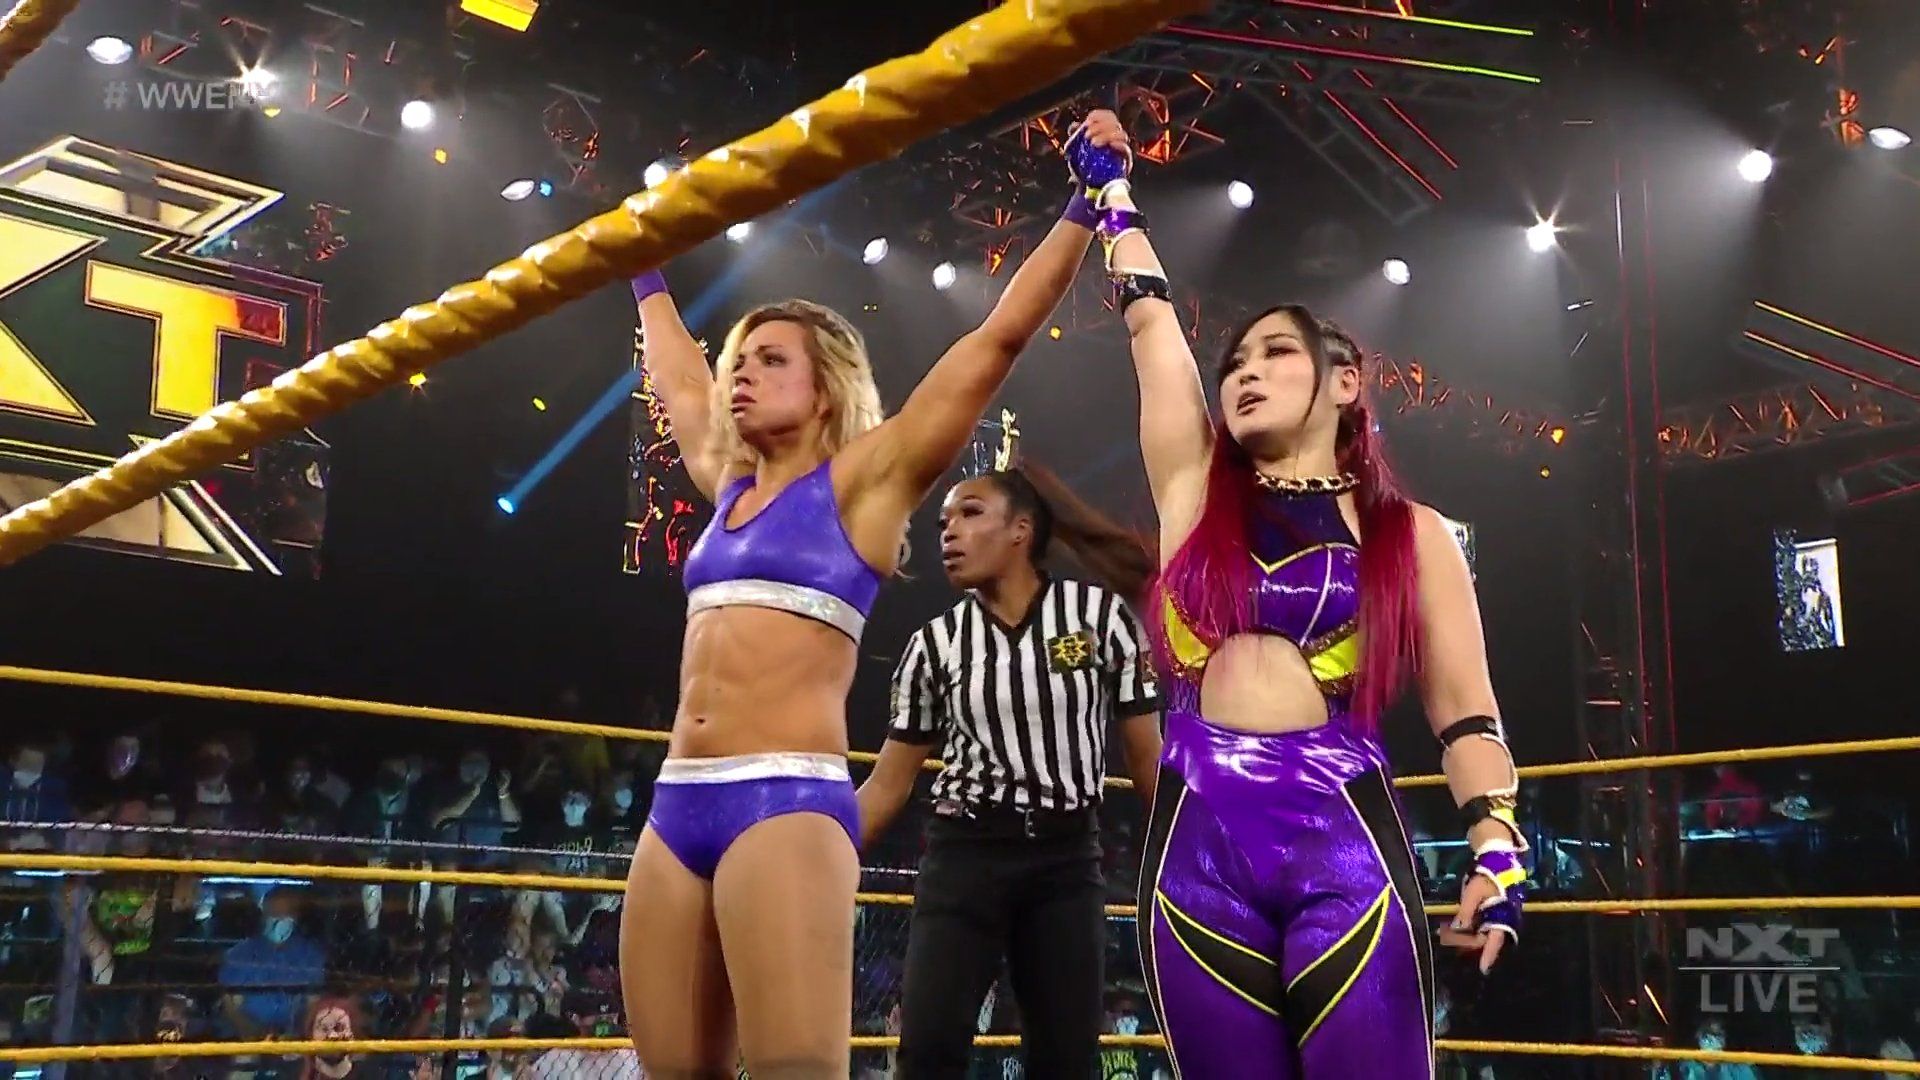 NXT Superstars Io Shirai and Zoey Stark following their win on the June 22, 2021 edition of NXT